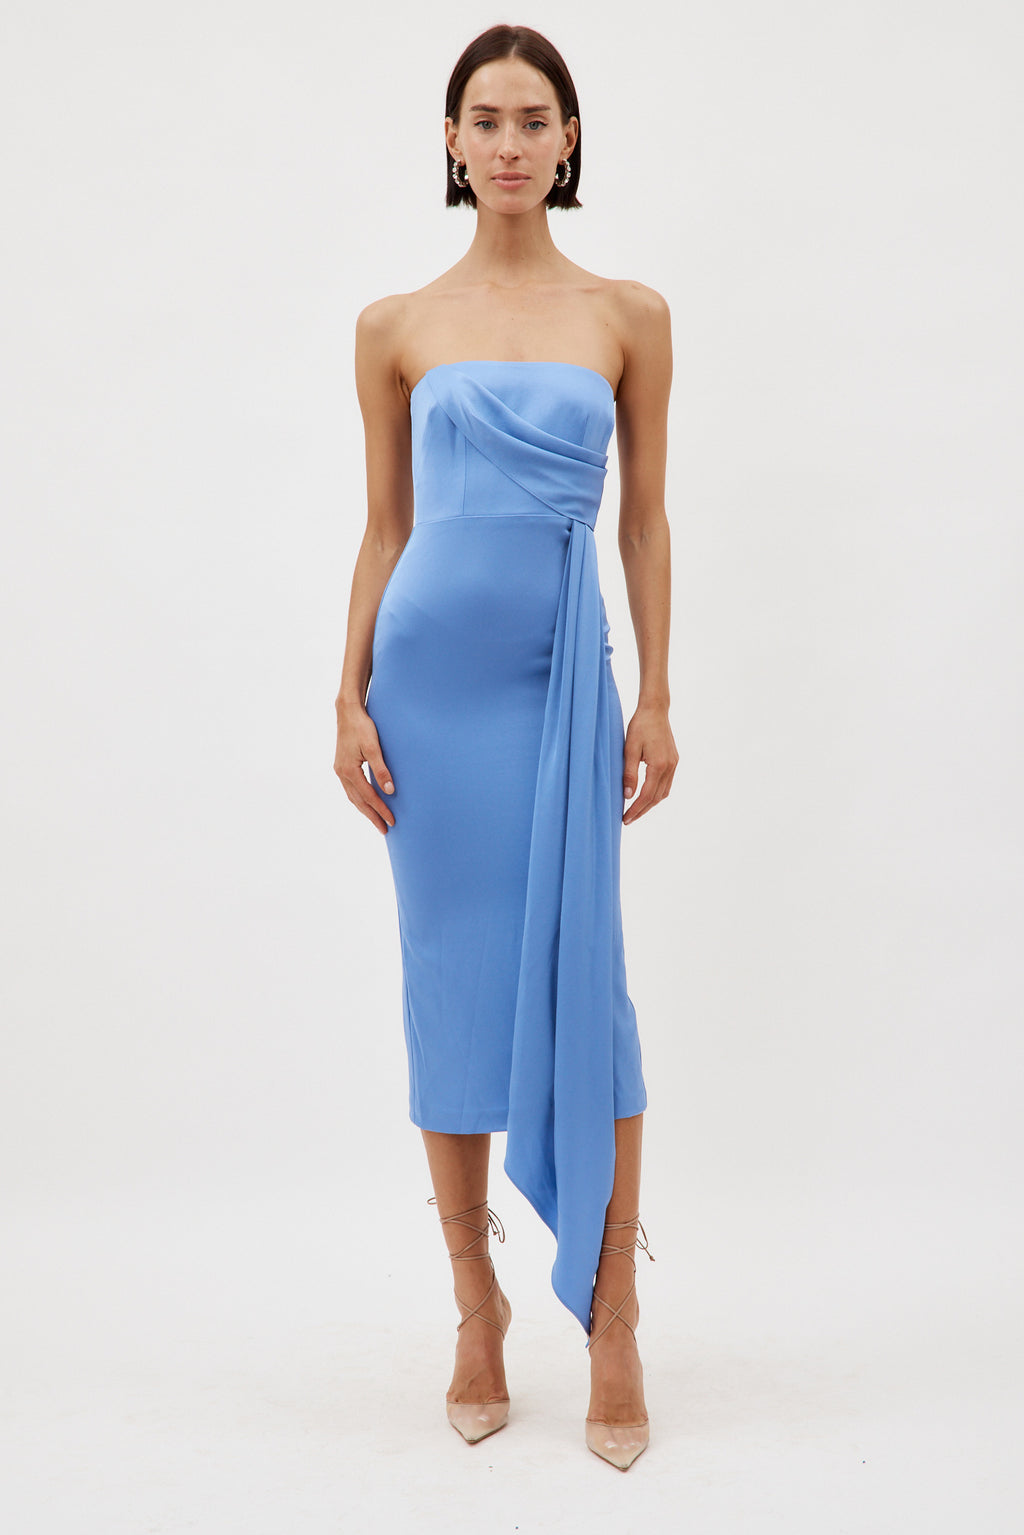 Satin Crepe Strapless Periwinkle Dress with Drape